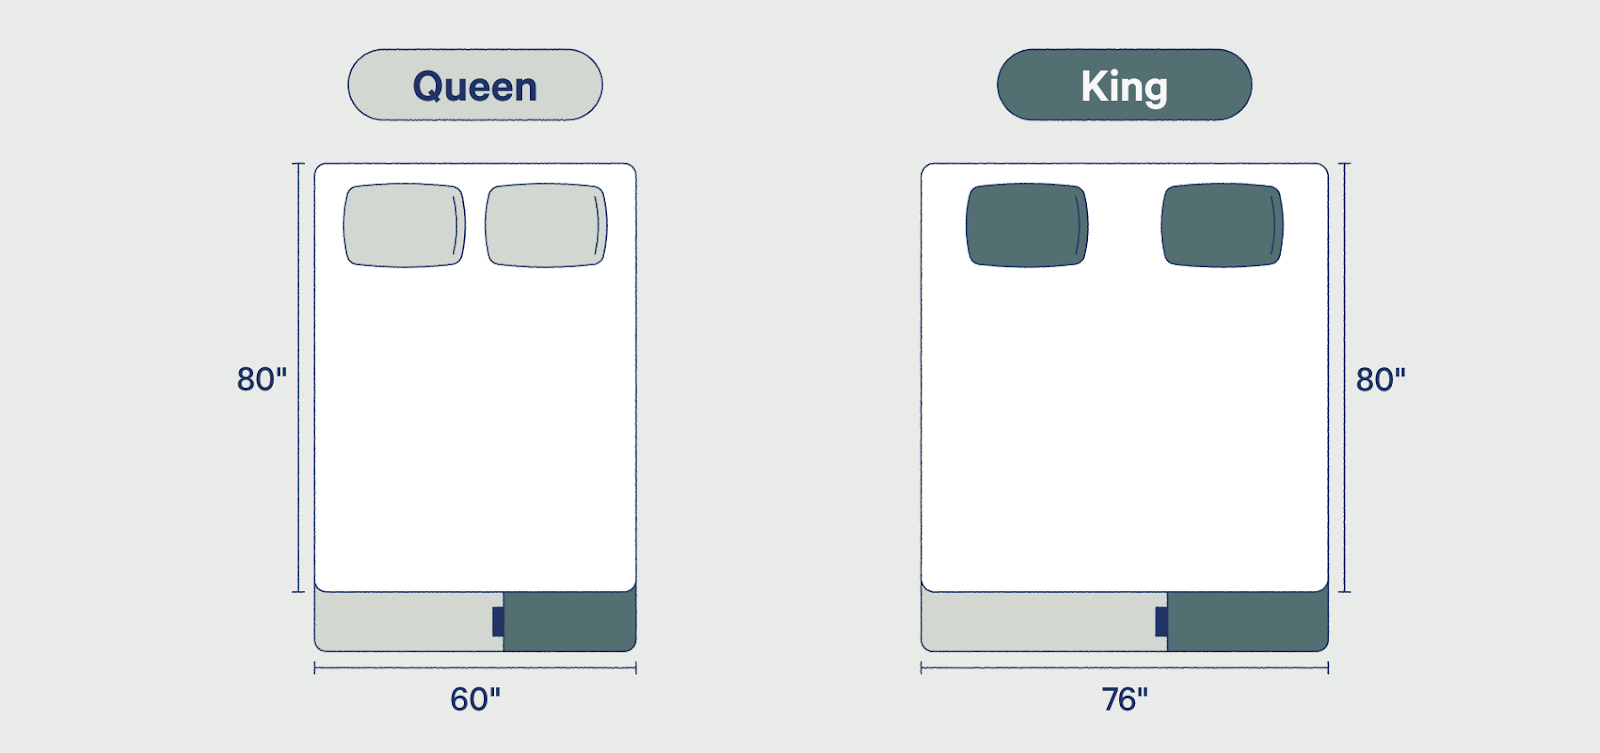 King Vs Queen Bed Size And Comparison, Dimensions Of A King Size Bed In Feet And Inches